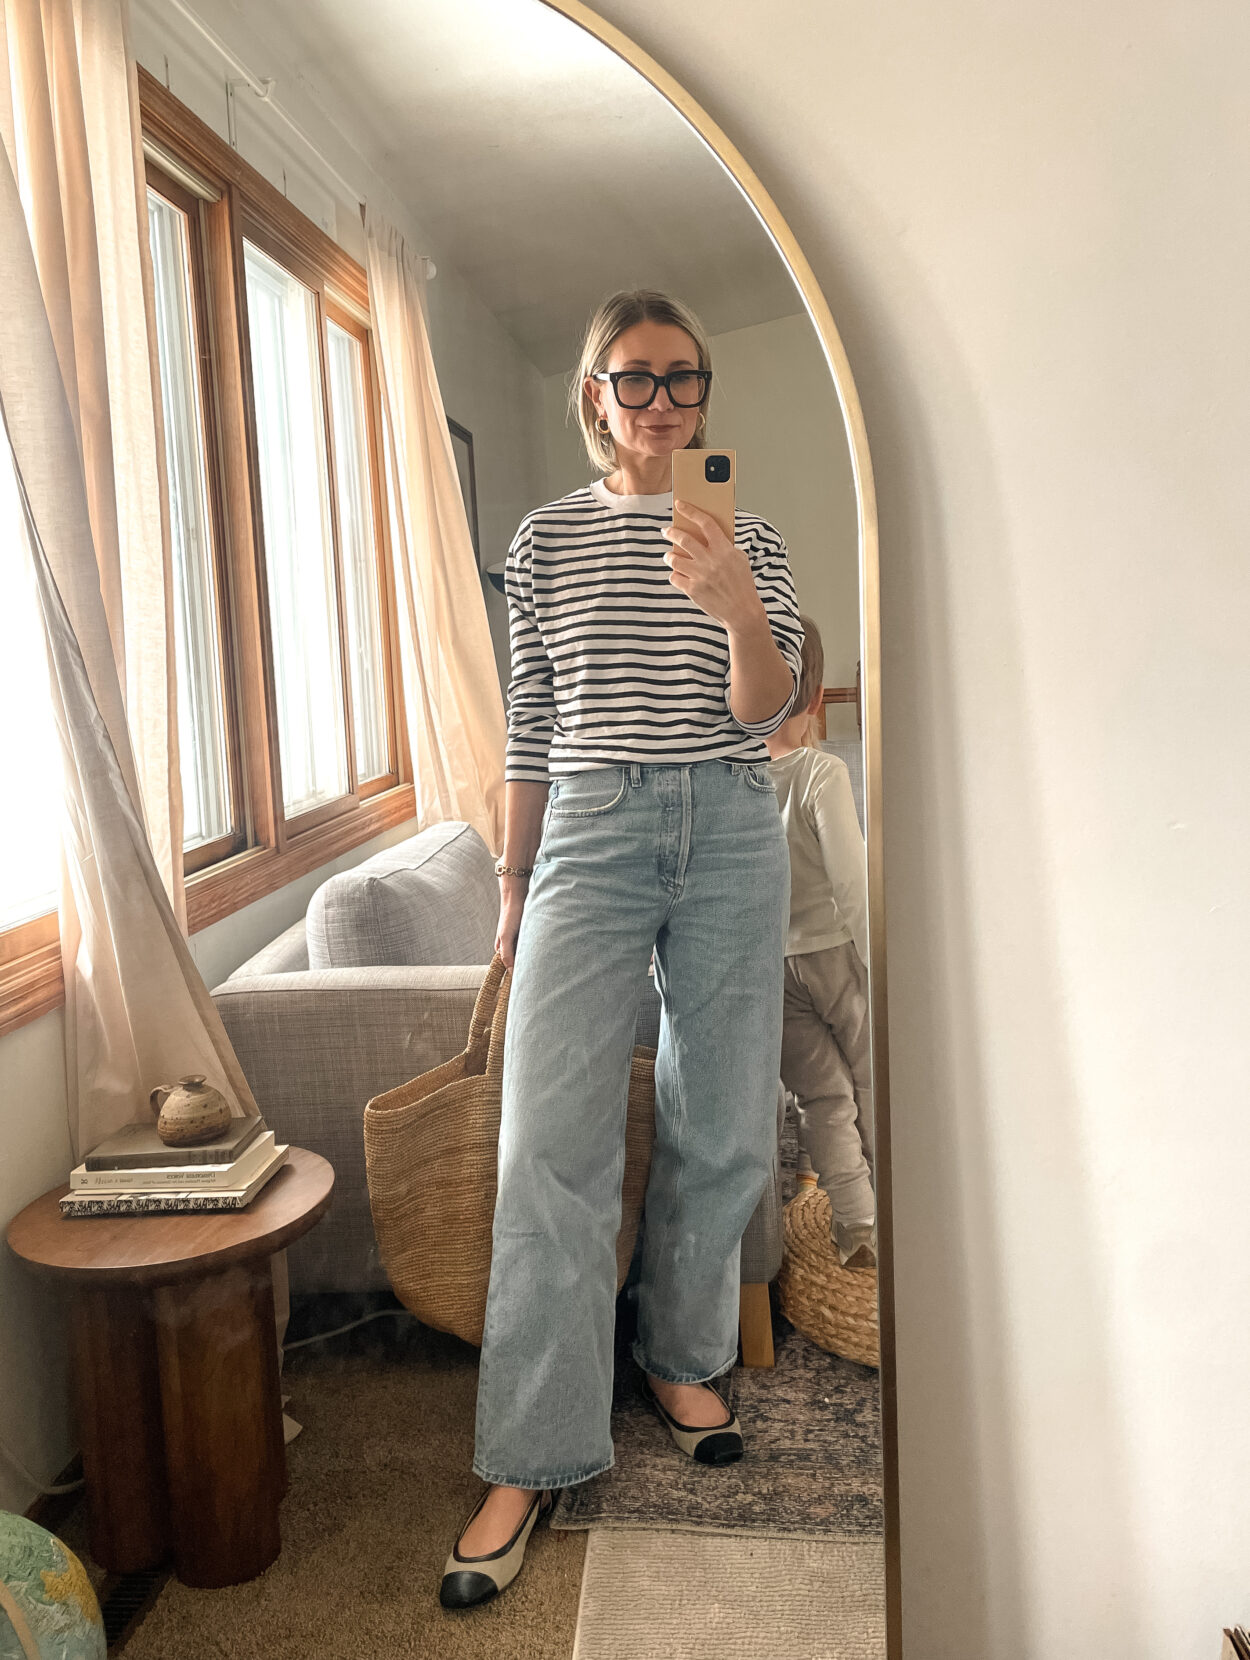 Karin Emily shares a mirror selfie wearing a striped shirt, baggy agolde jeans and two tone flats